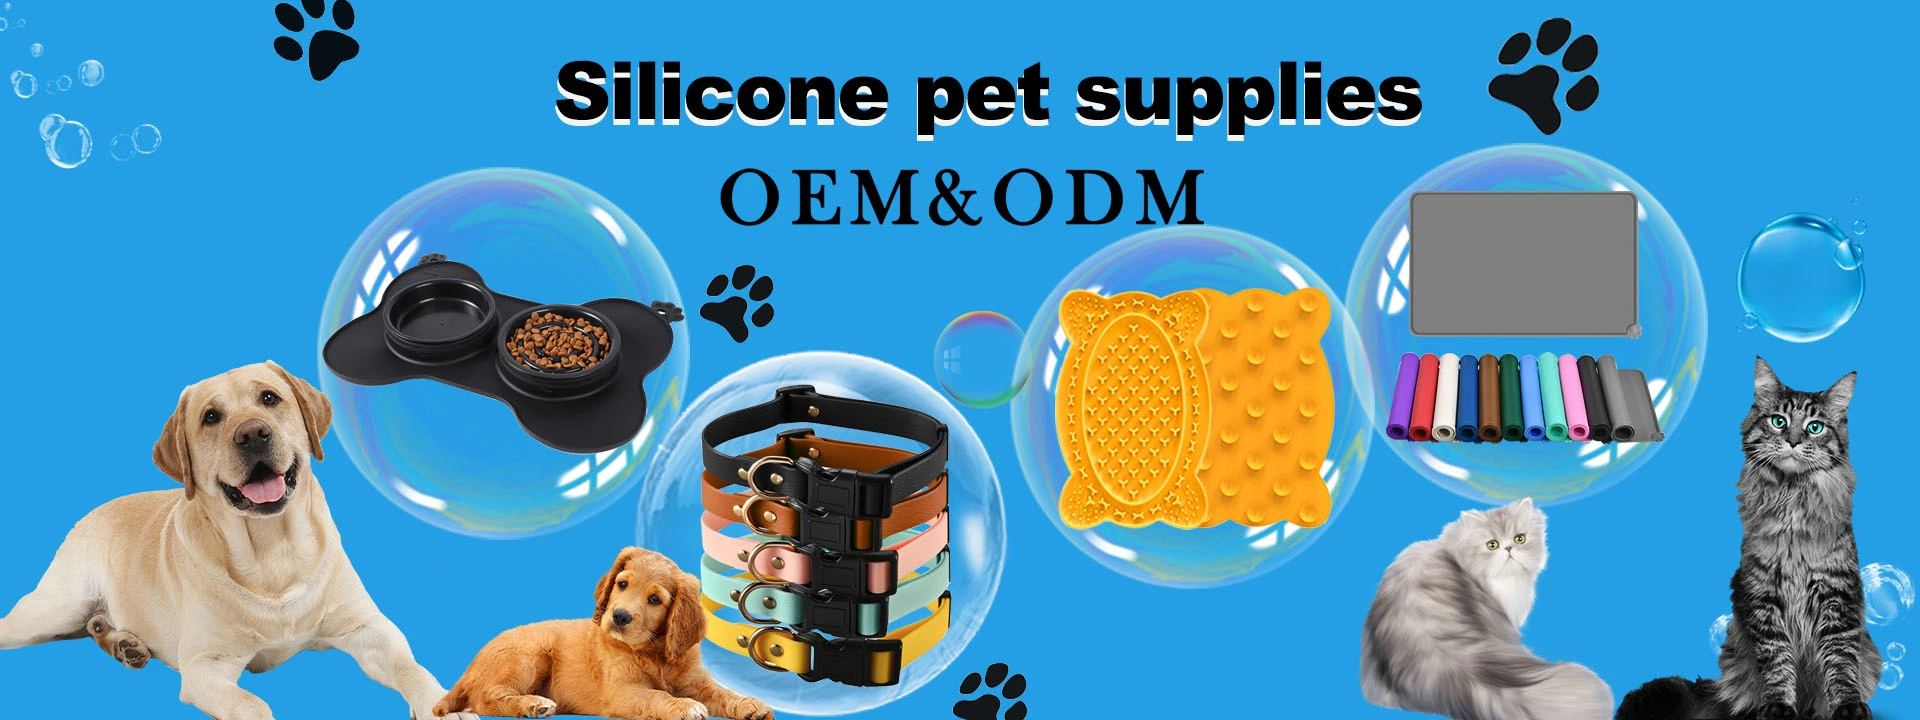 Silicone pet supplies